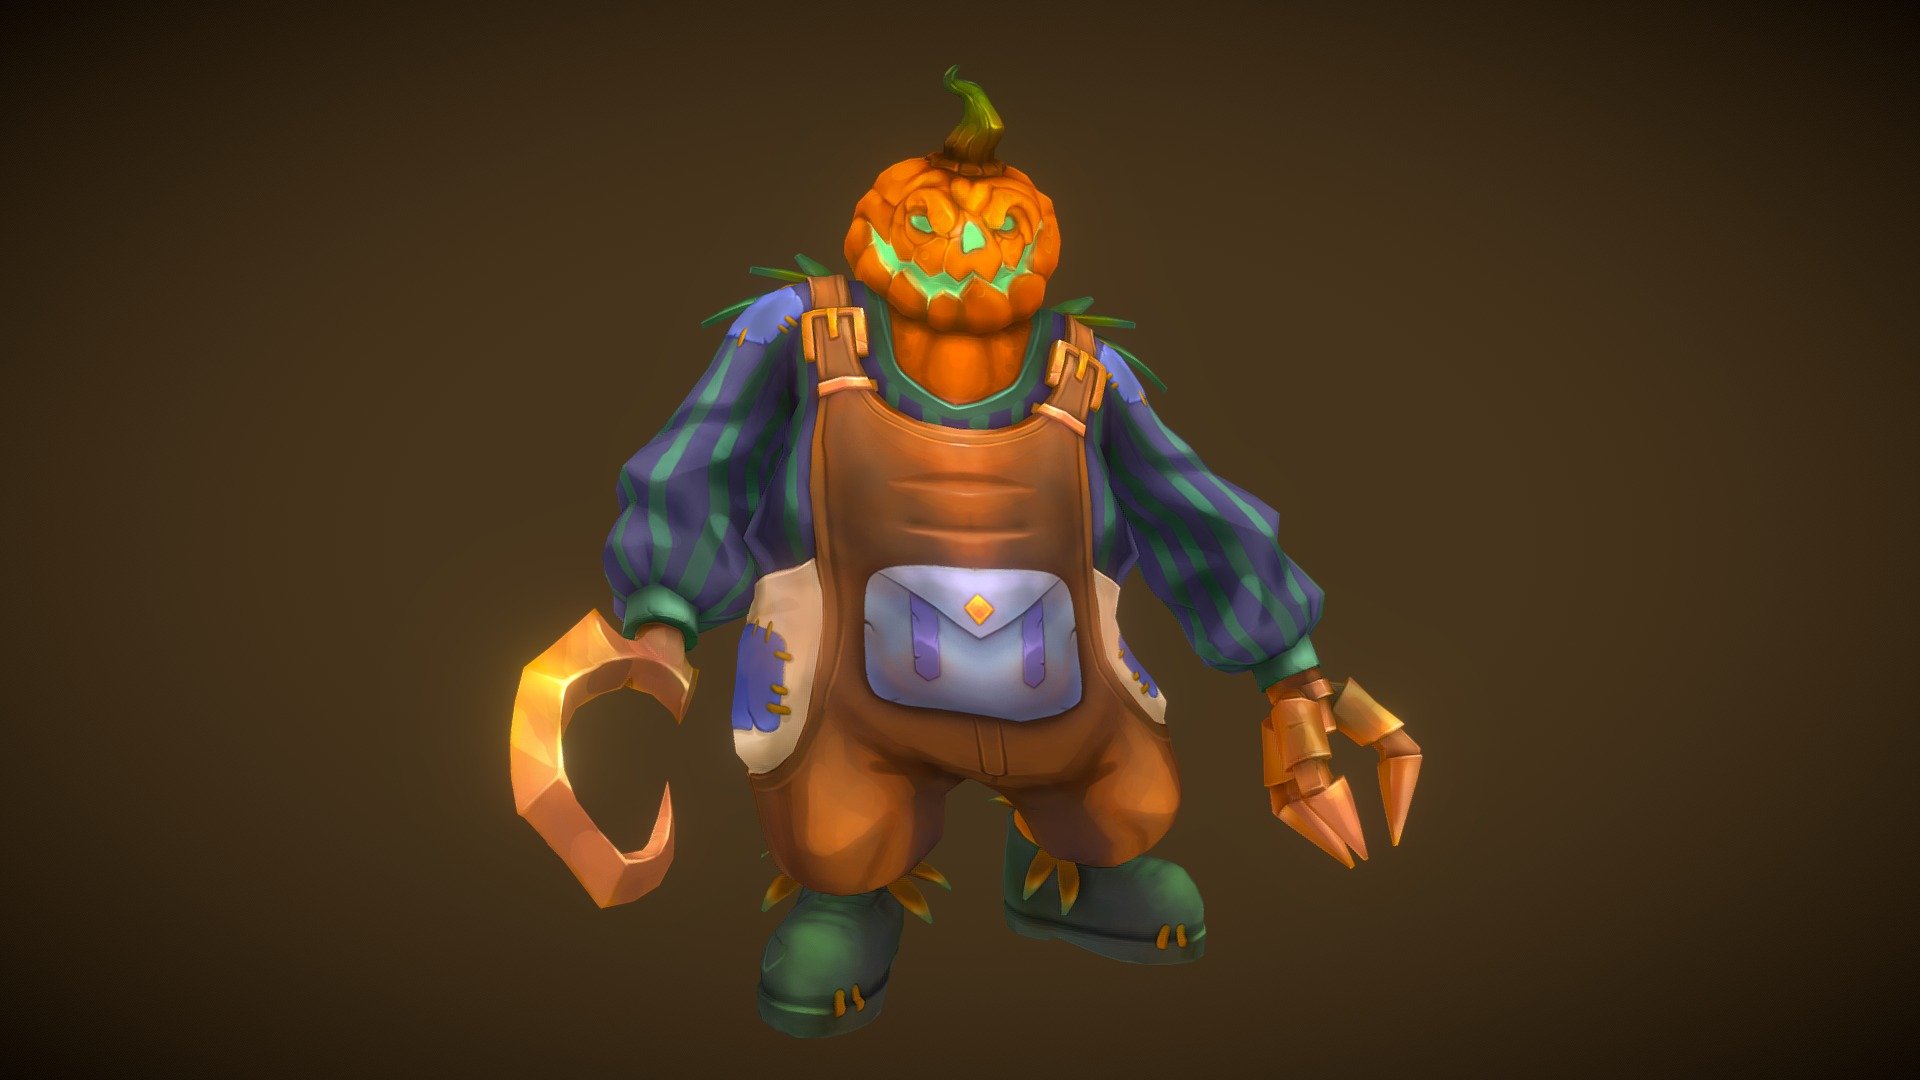 Stylized character for a project.

Software used: Zbrush, Autodesk Maya, Autodesk 3ds Max, Substance Painter - Stylized Pumpkin Golem - 3D model by N-hance Studio (@Malice6731) 3d model